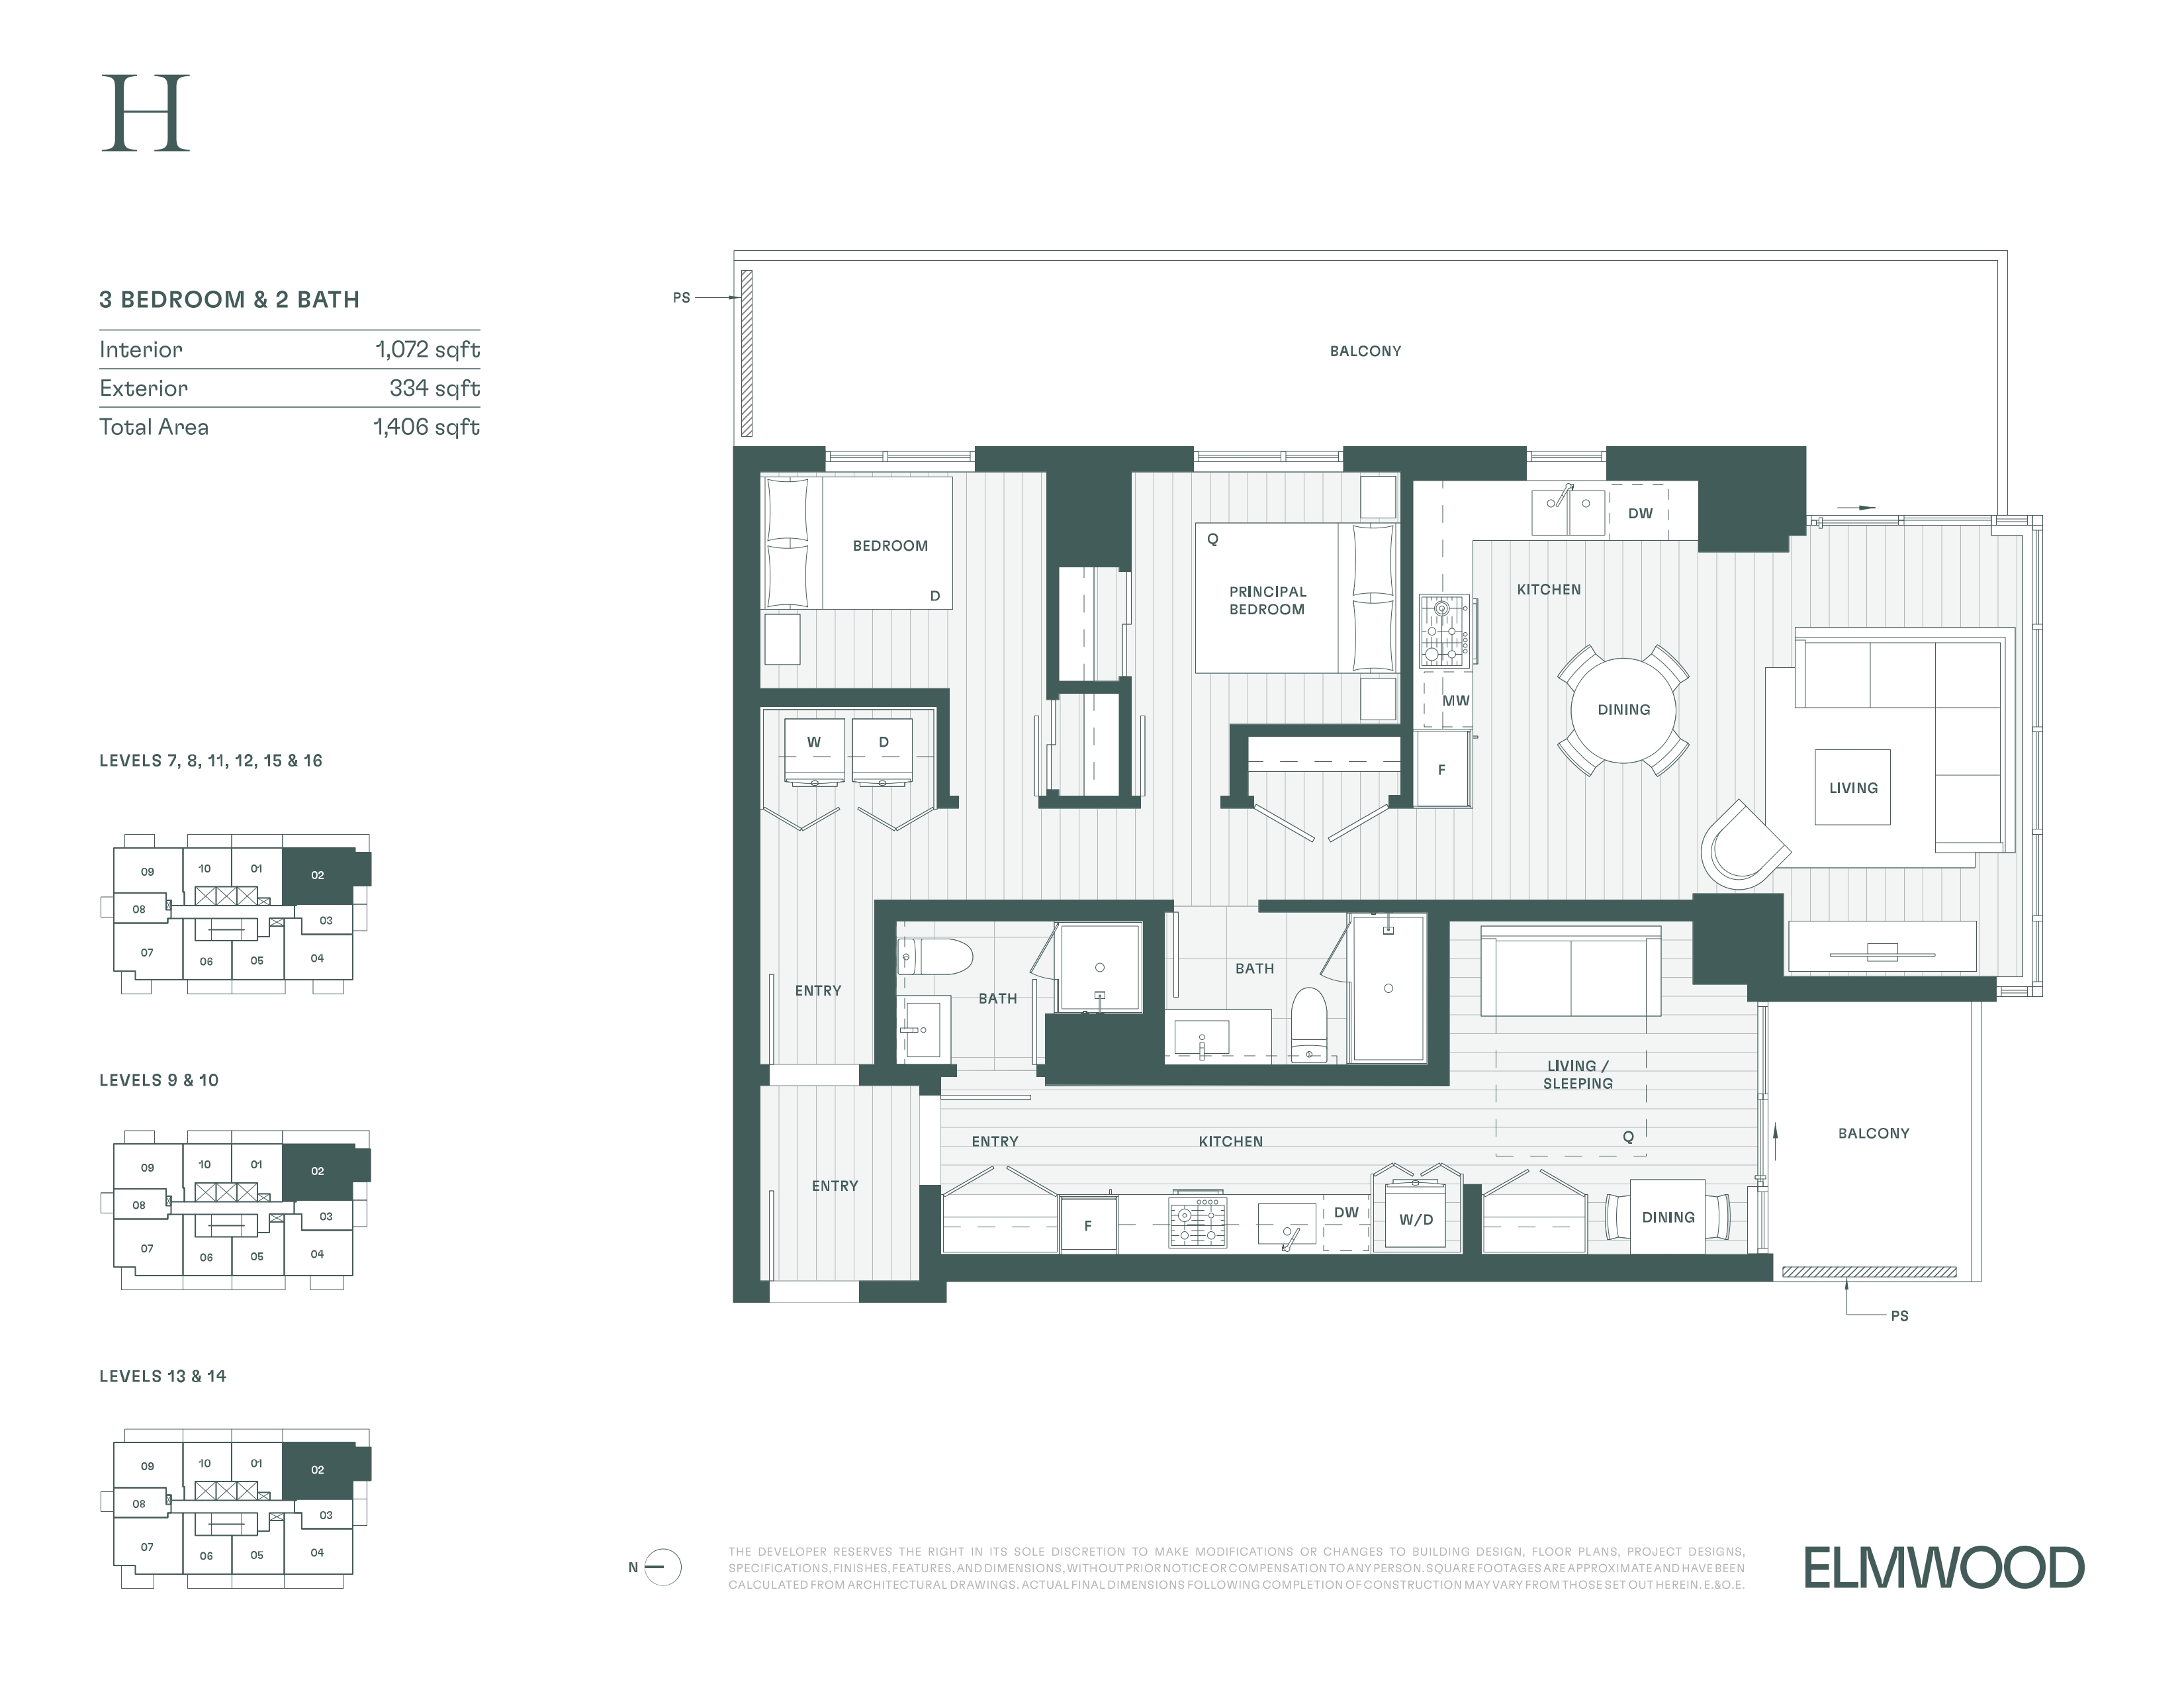  Floor Plan of Elmwood Condos with undefined beds